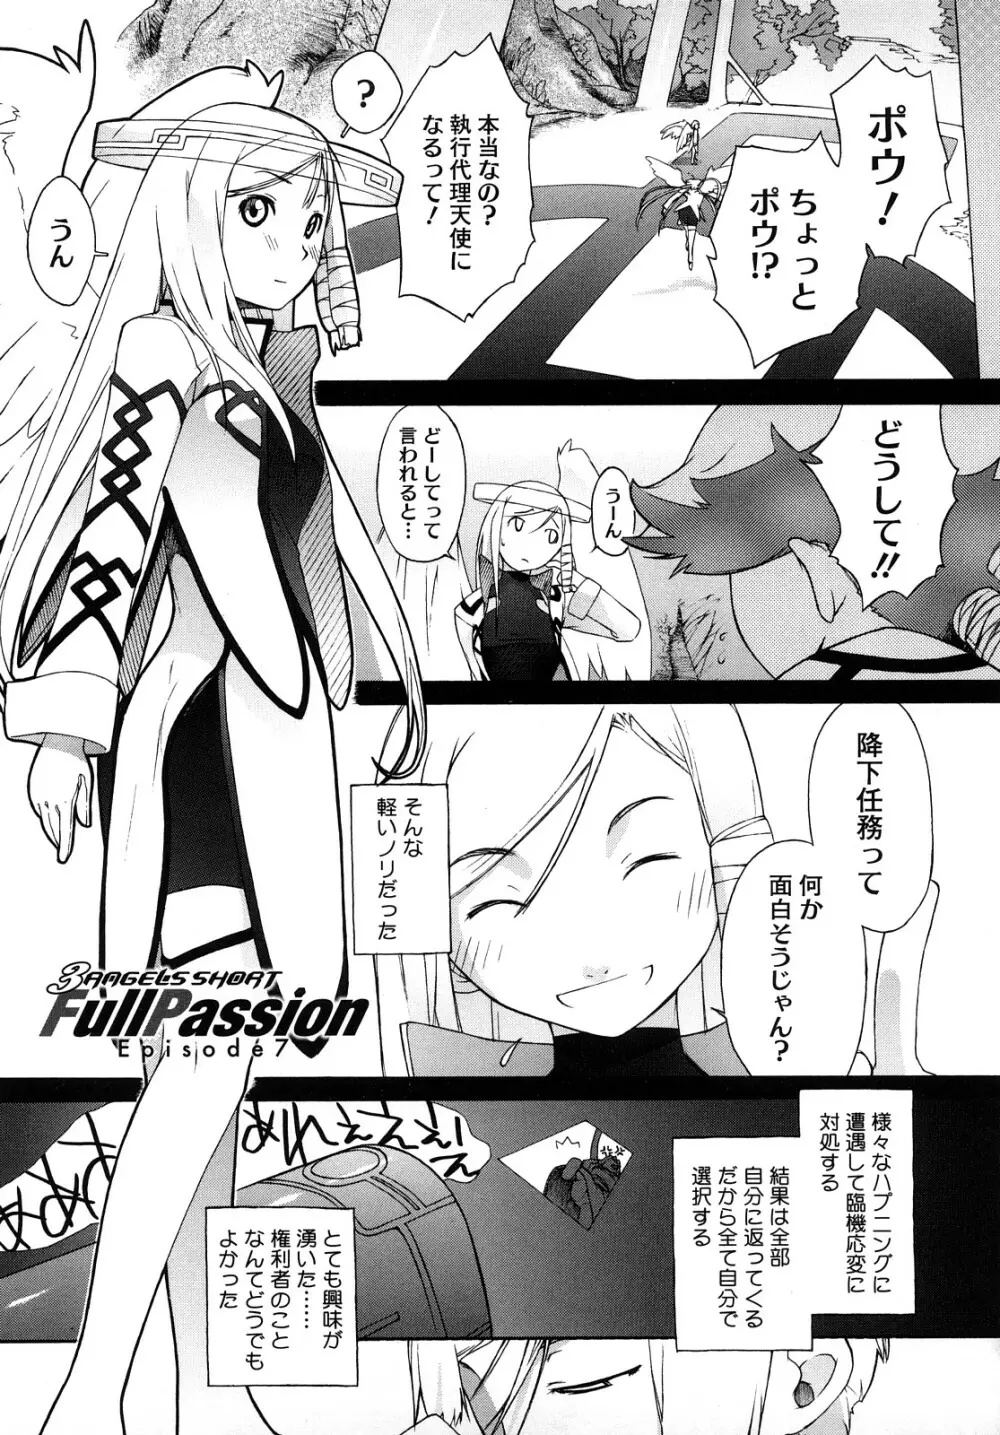 3ANGELS SHORT Full Passion Page.178